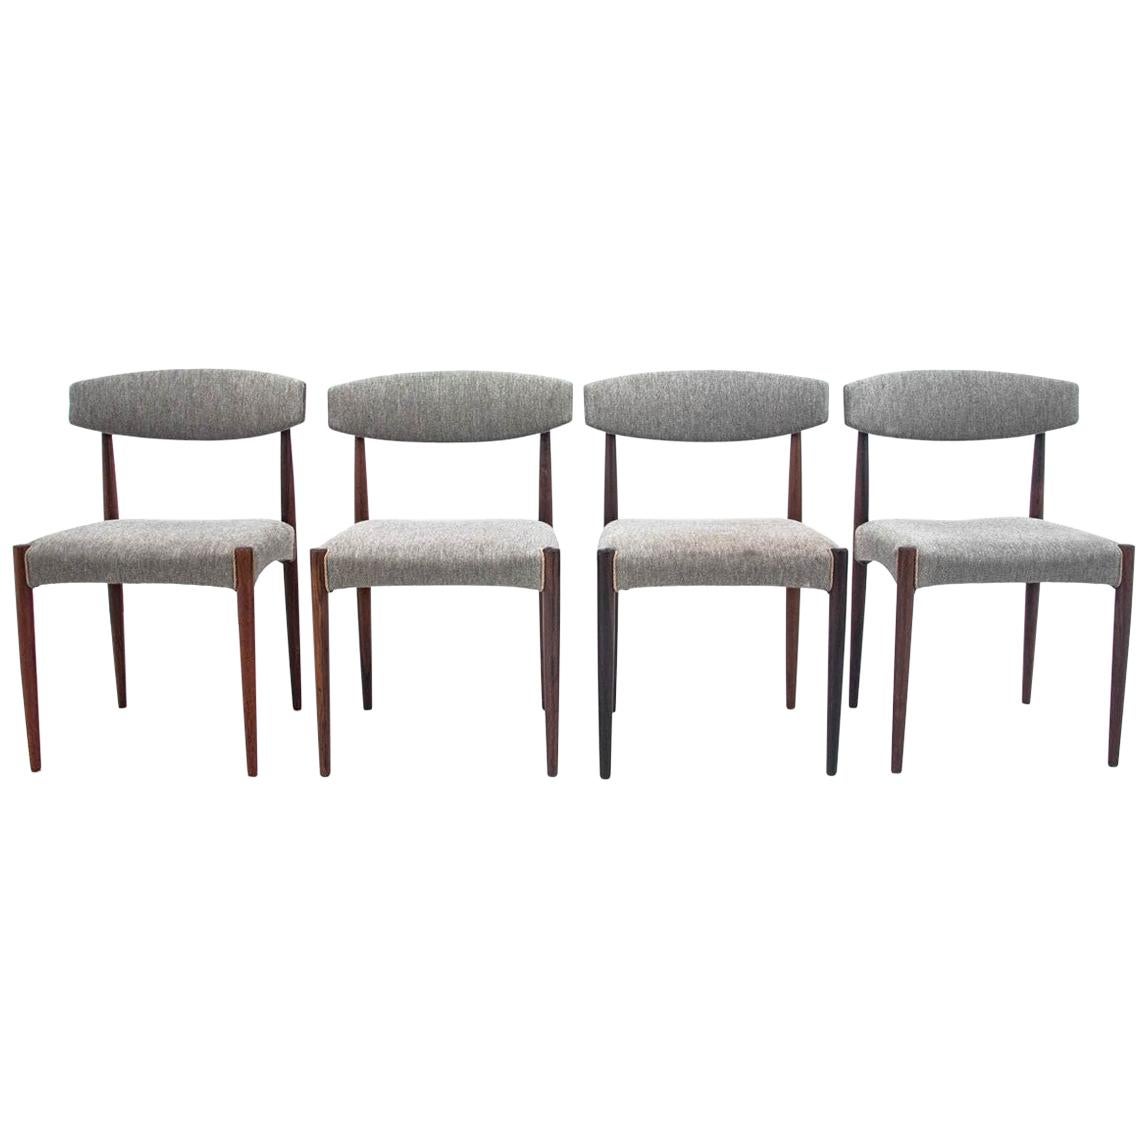 Set of Four Midcentury Chairs, Denmark, 1960s